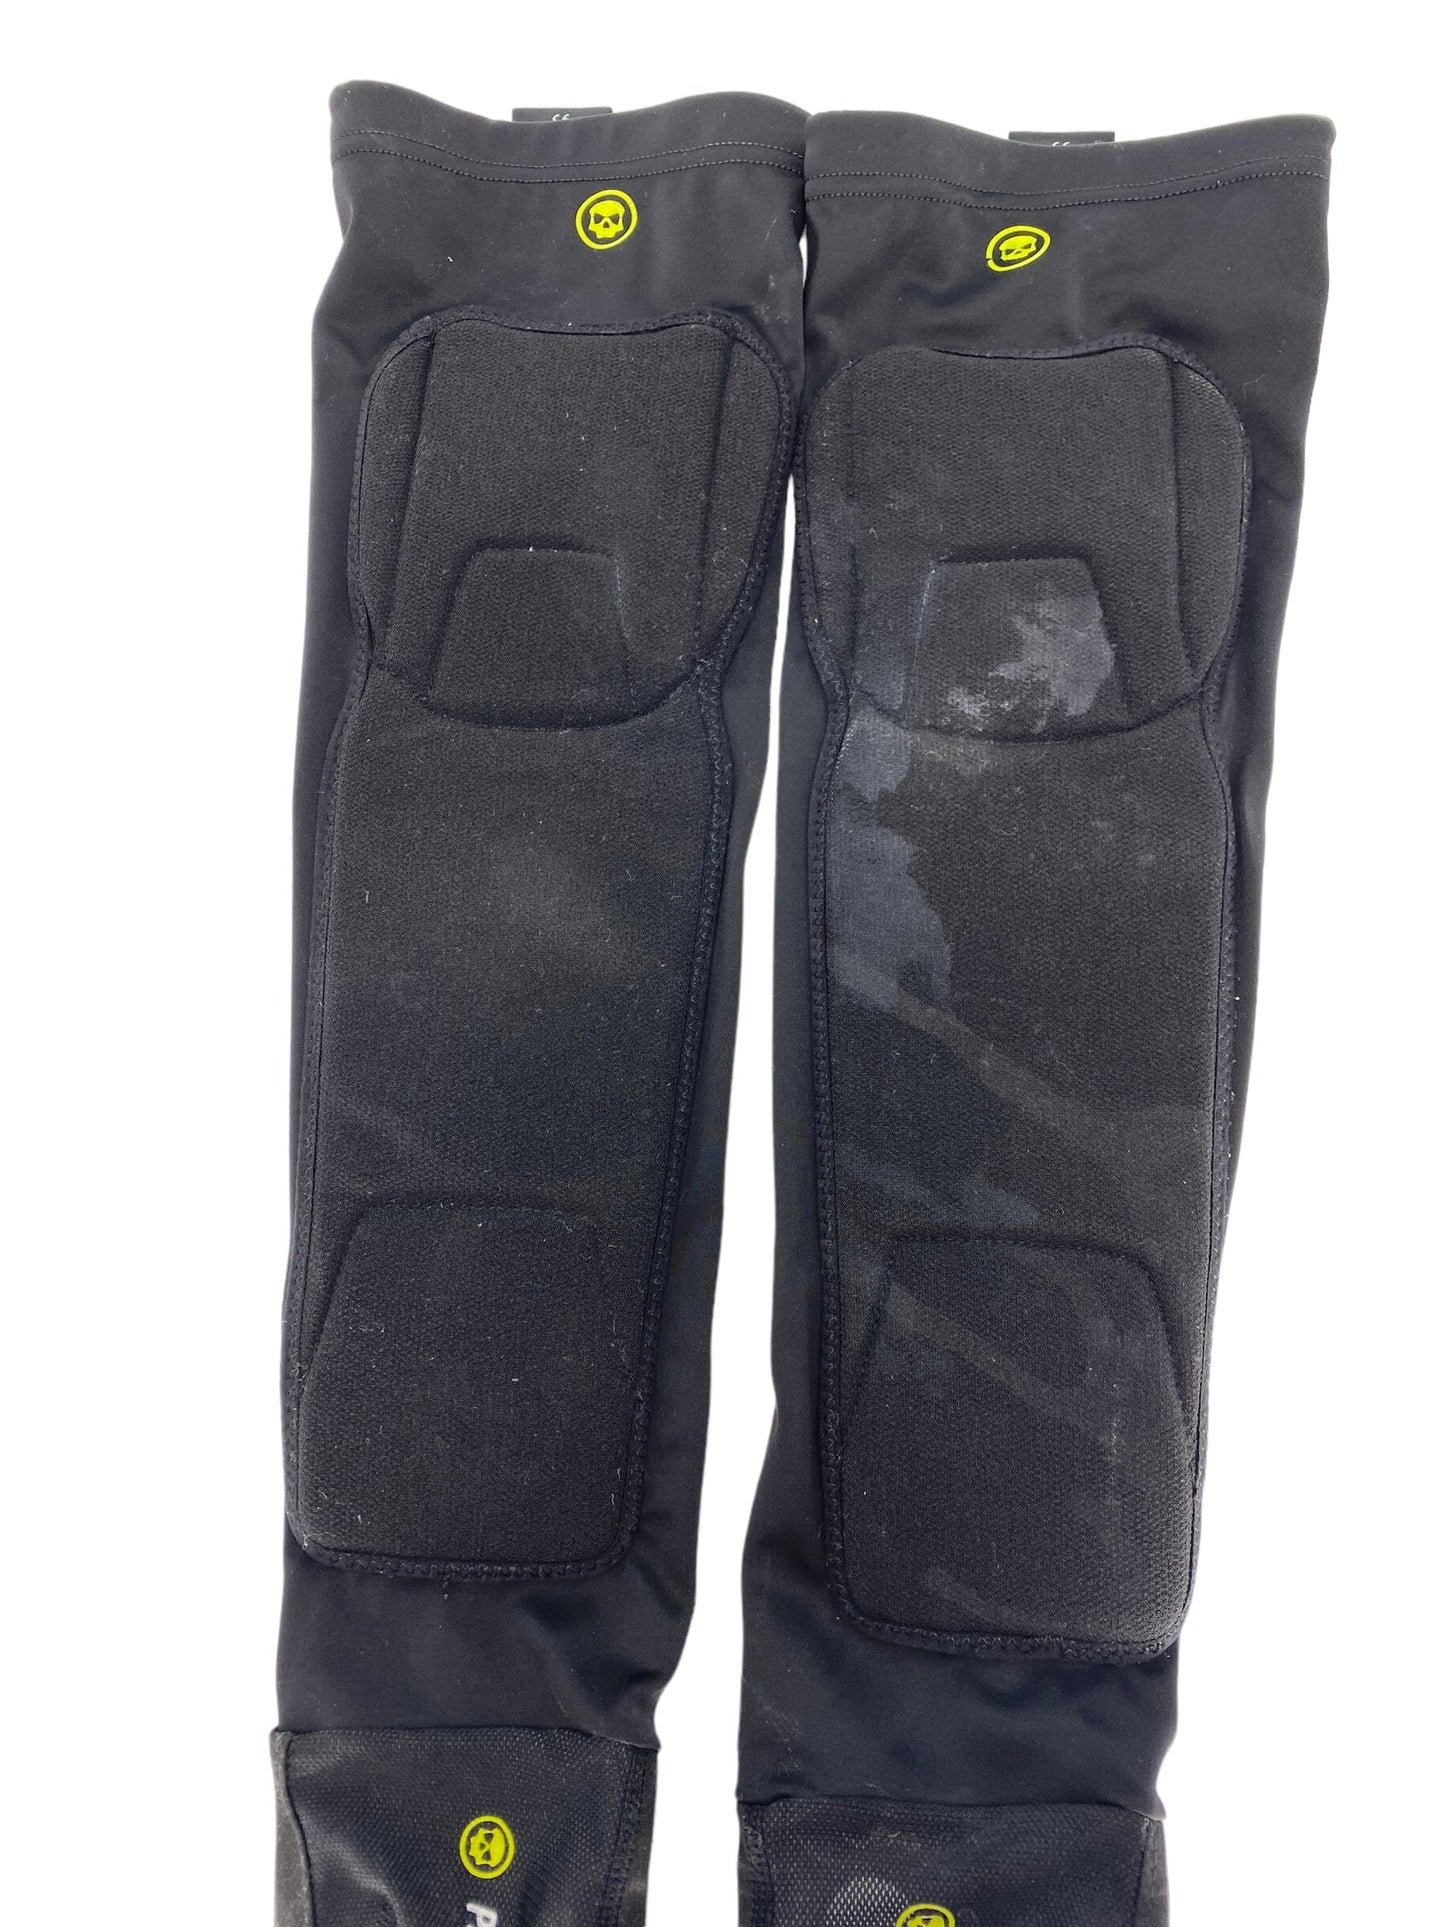 Used Pro DNA Elbow Pads Paintball size 2 XL Paintball Gun from CPXBrosPaintball Buy/Sell/Trade Paintball Markers, Paintball Hoppers, Paintball Masks, and Hormesis Headbands